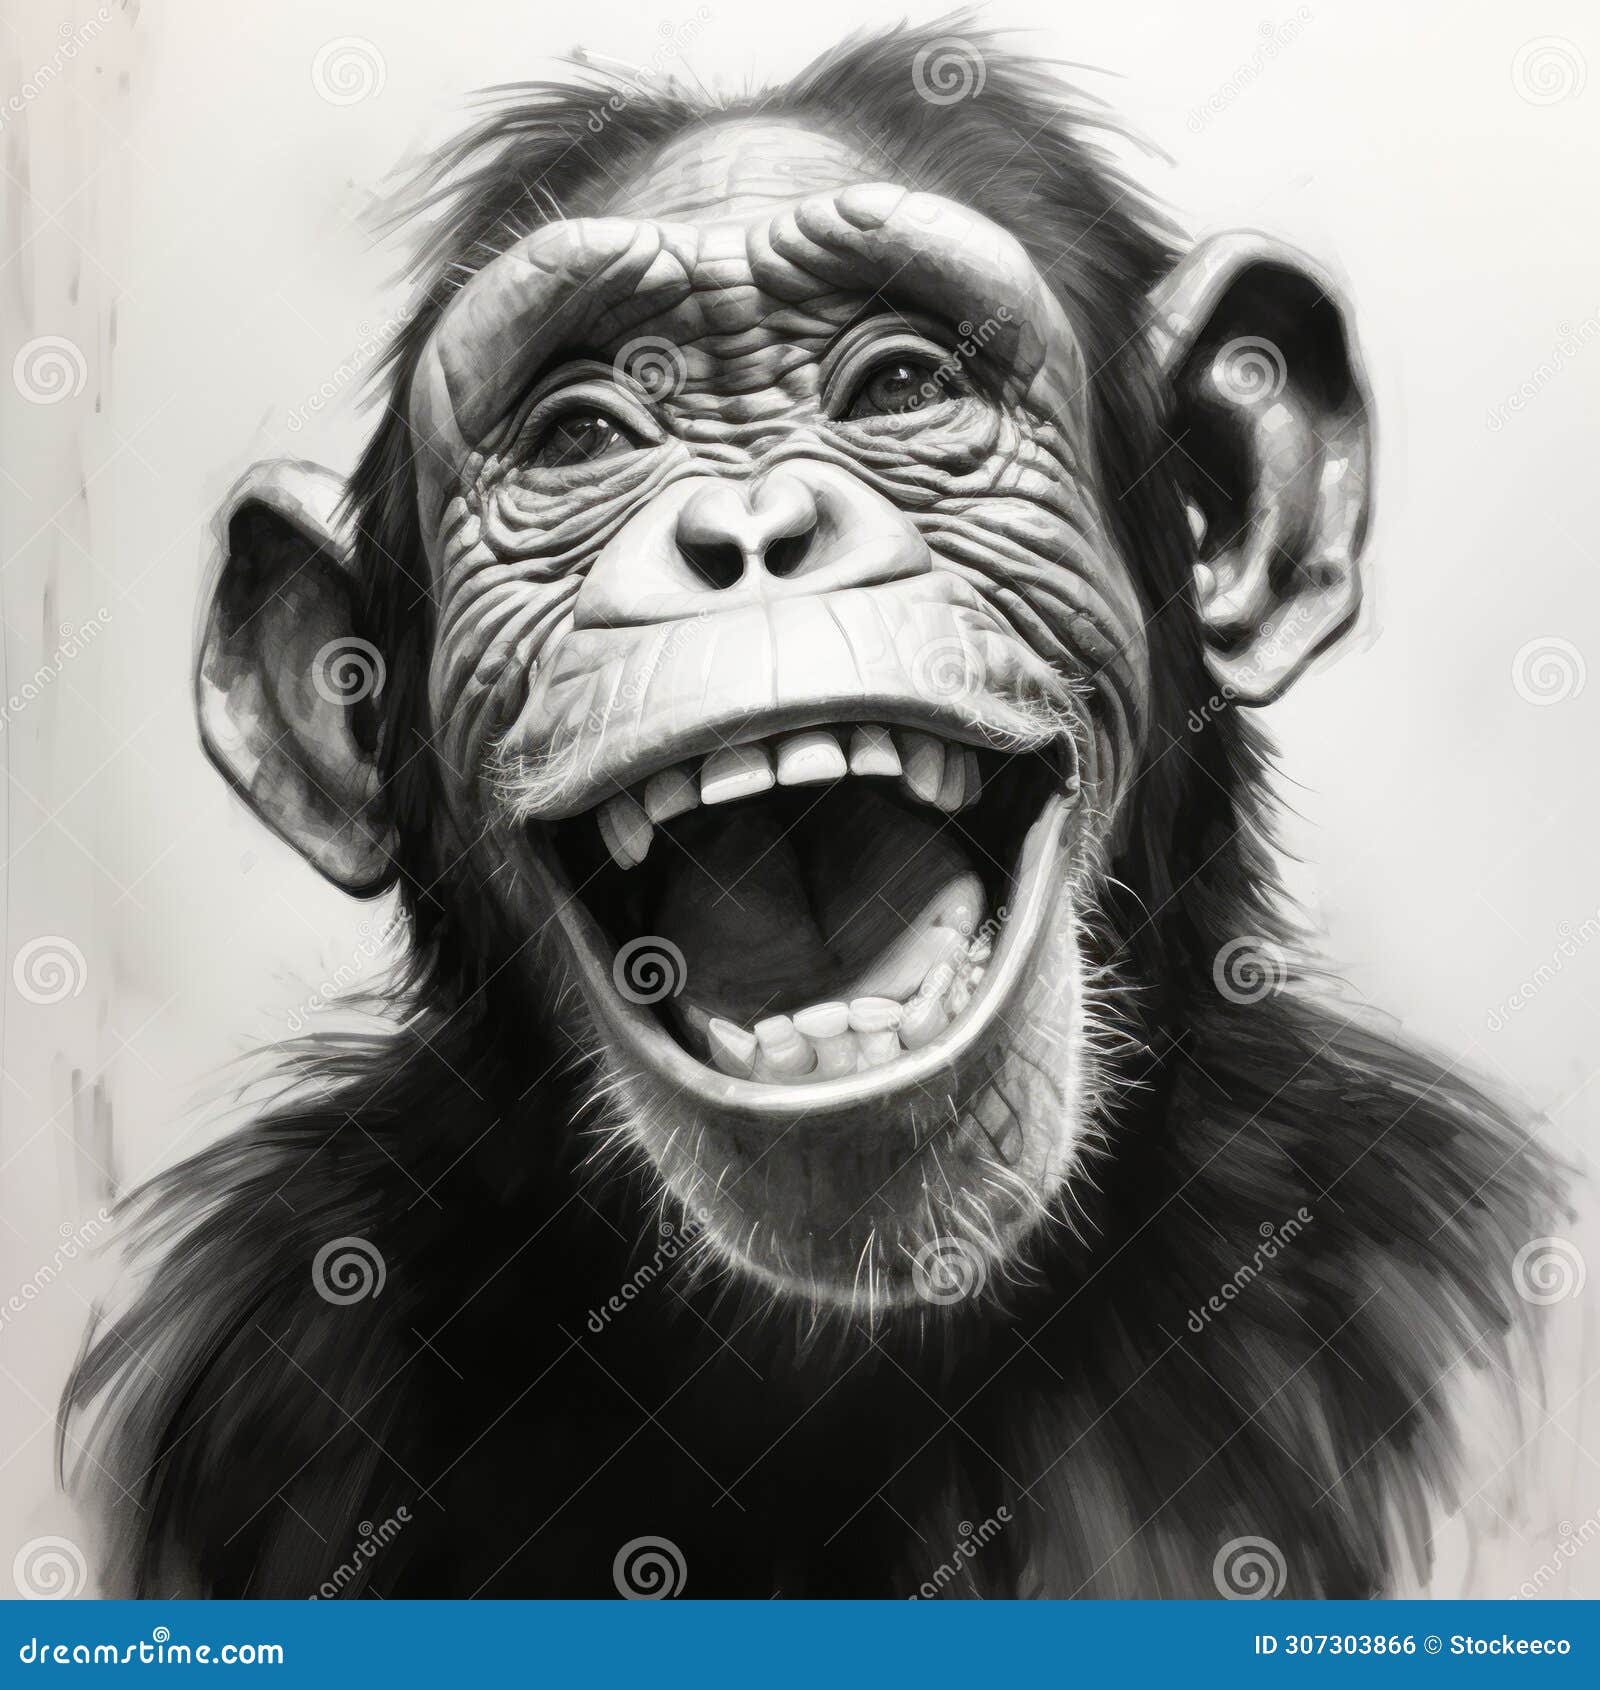 smiling chimpanzee speedpainting: a charcoal portrait in 8k resolution